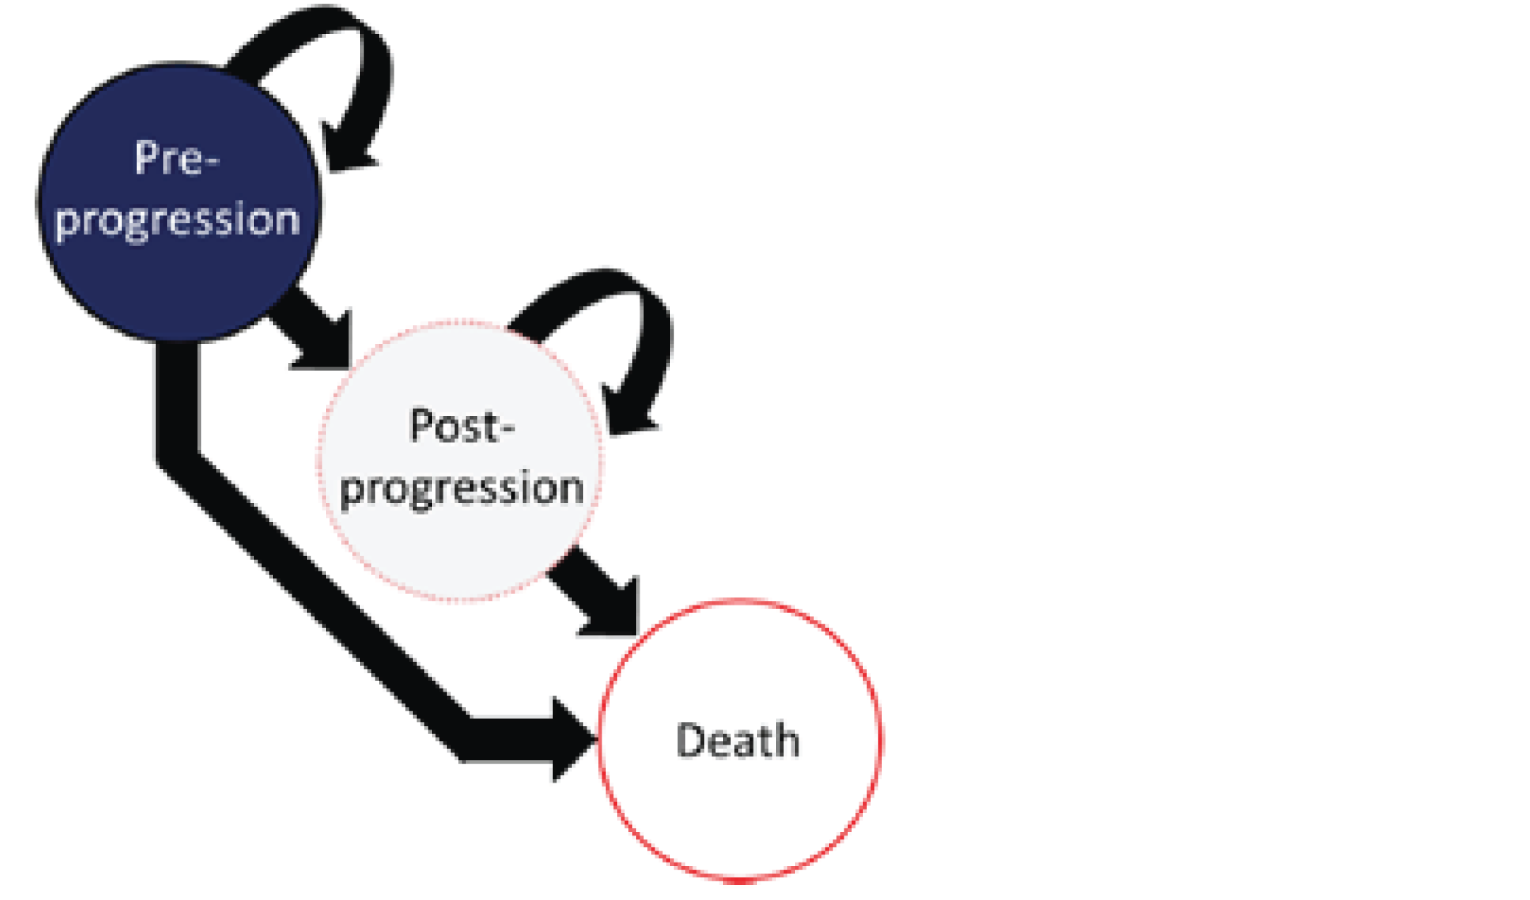 The figure depicts the sponsor’s 3 state partitioned survival model. In each cycle, patients can remain in the pre-progression state, or transition to the post-progression or death states. Patients can then remain in the post-progression state or progress to death.